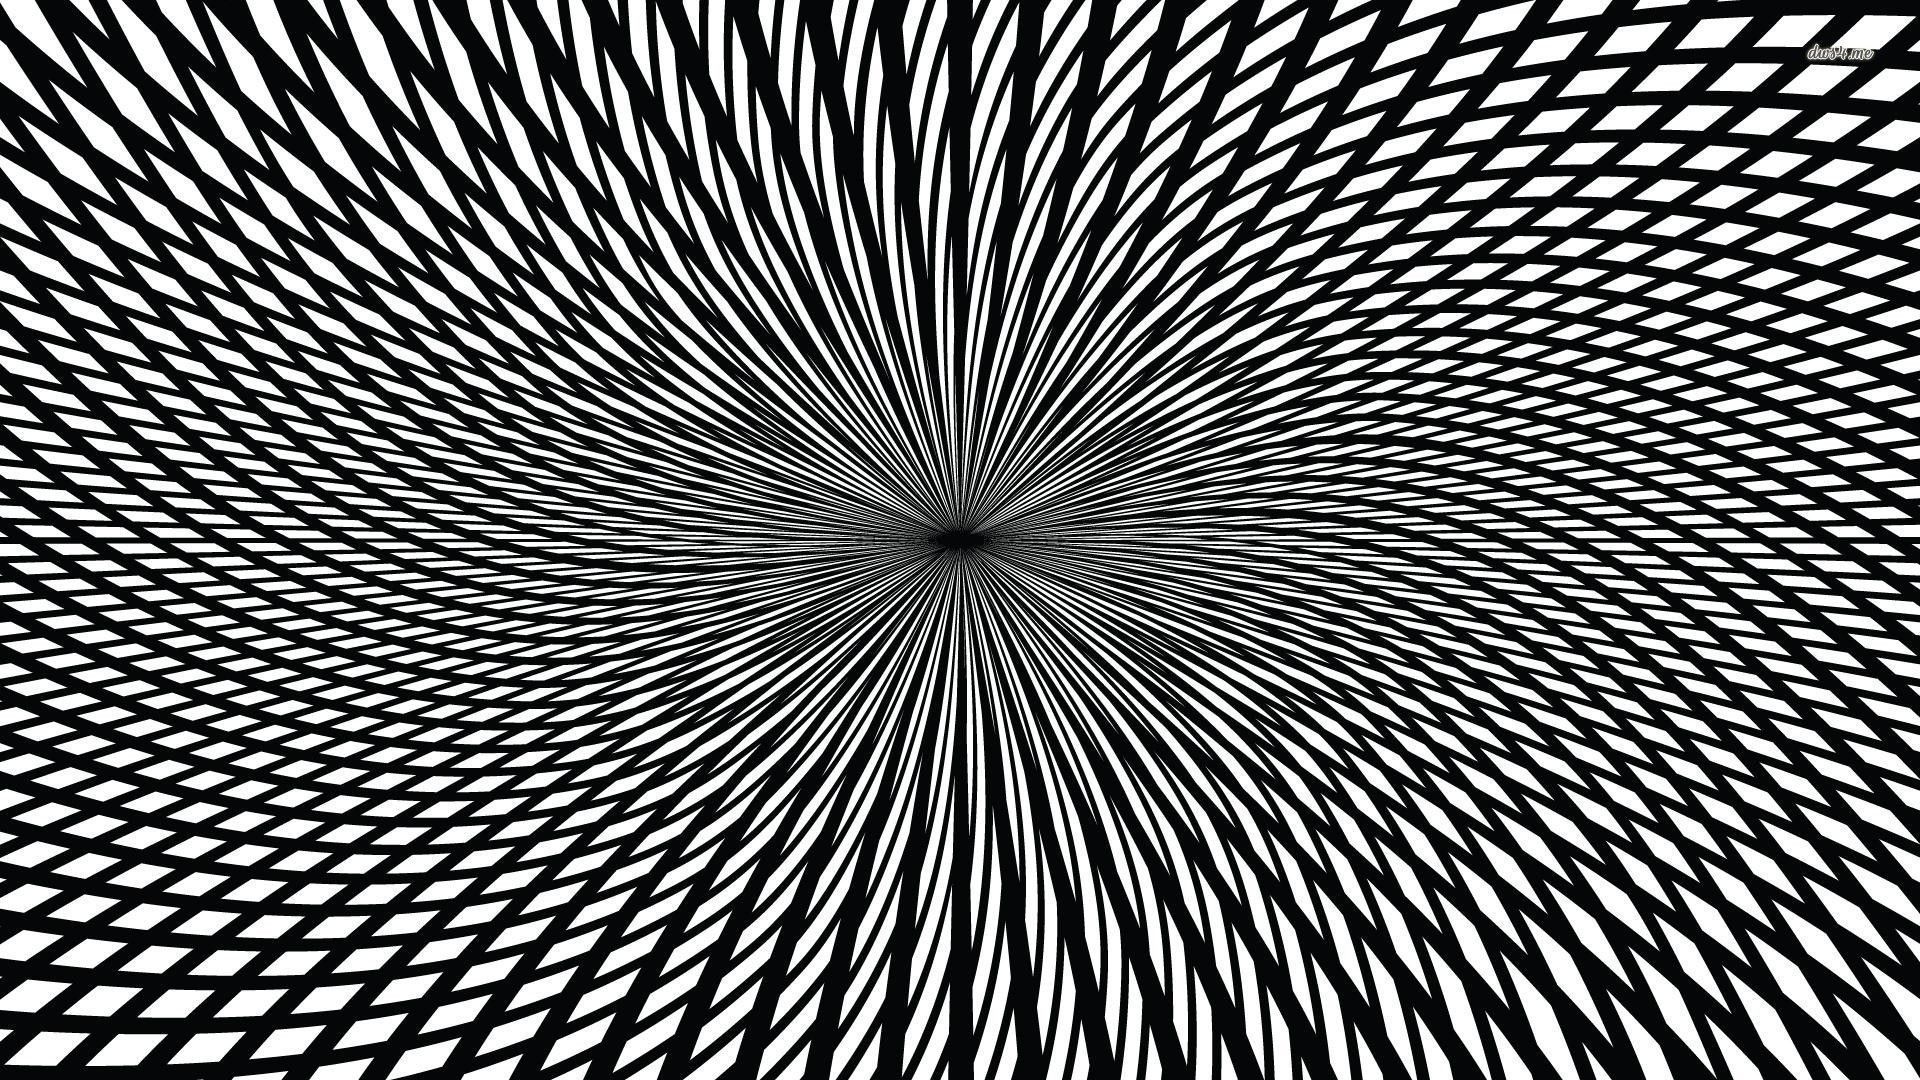 Optical illusion wallpaper - Abstract wallpapers - #20655